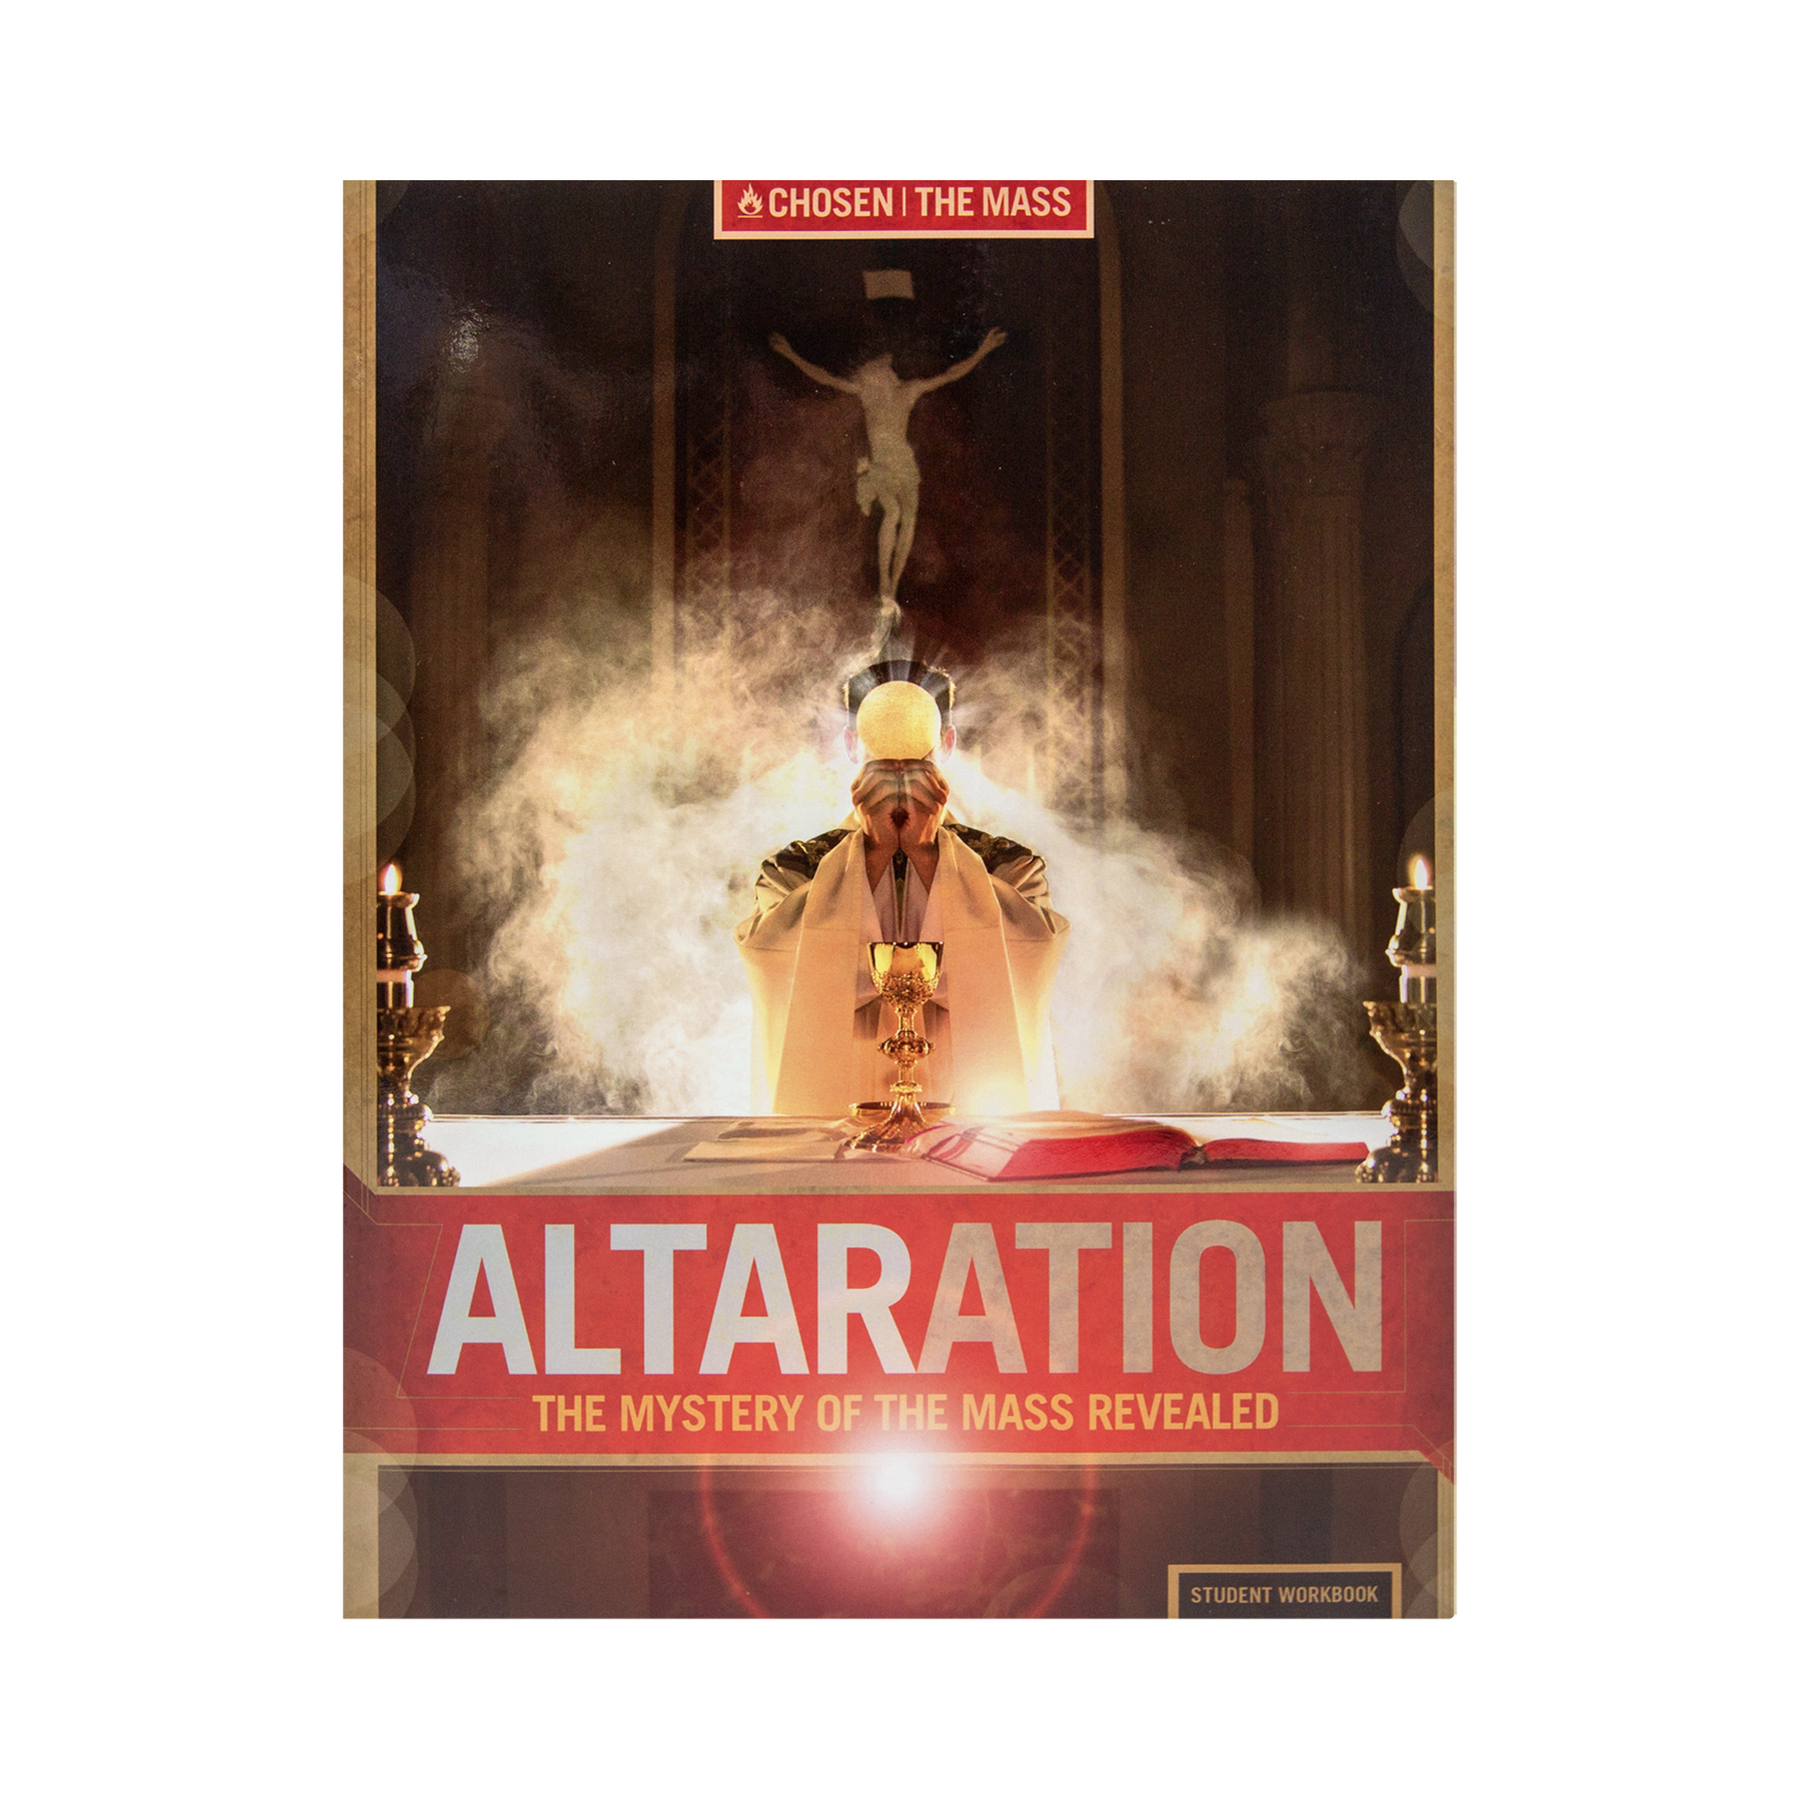 Altaration: The Mystery of the Mass Revealed Student Workbook